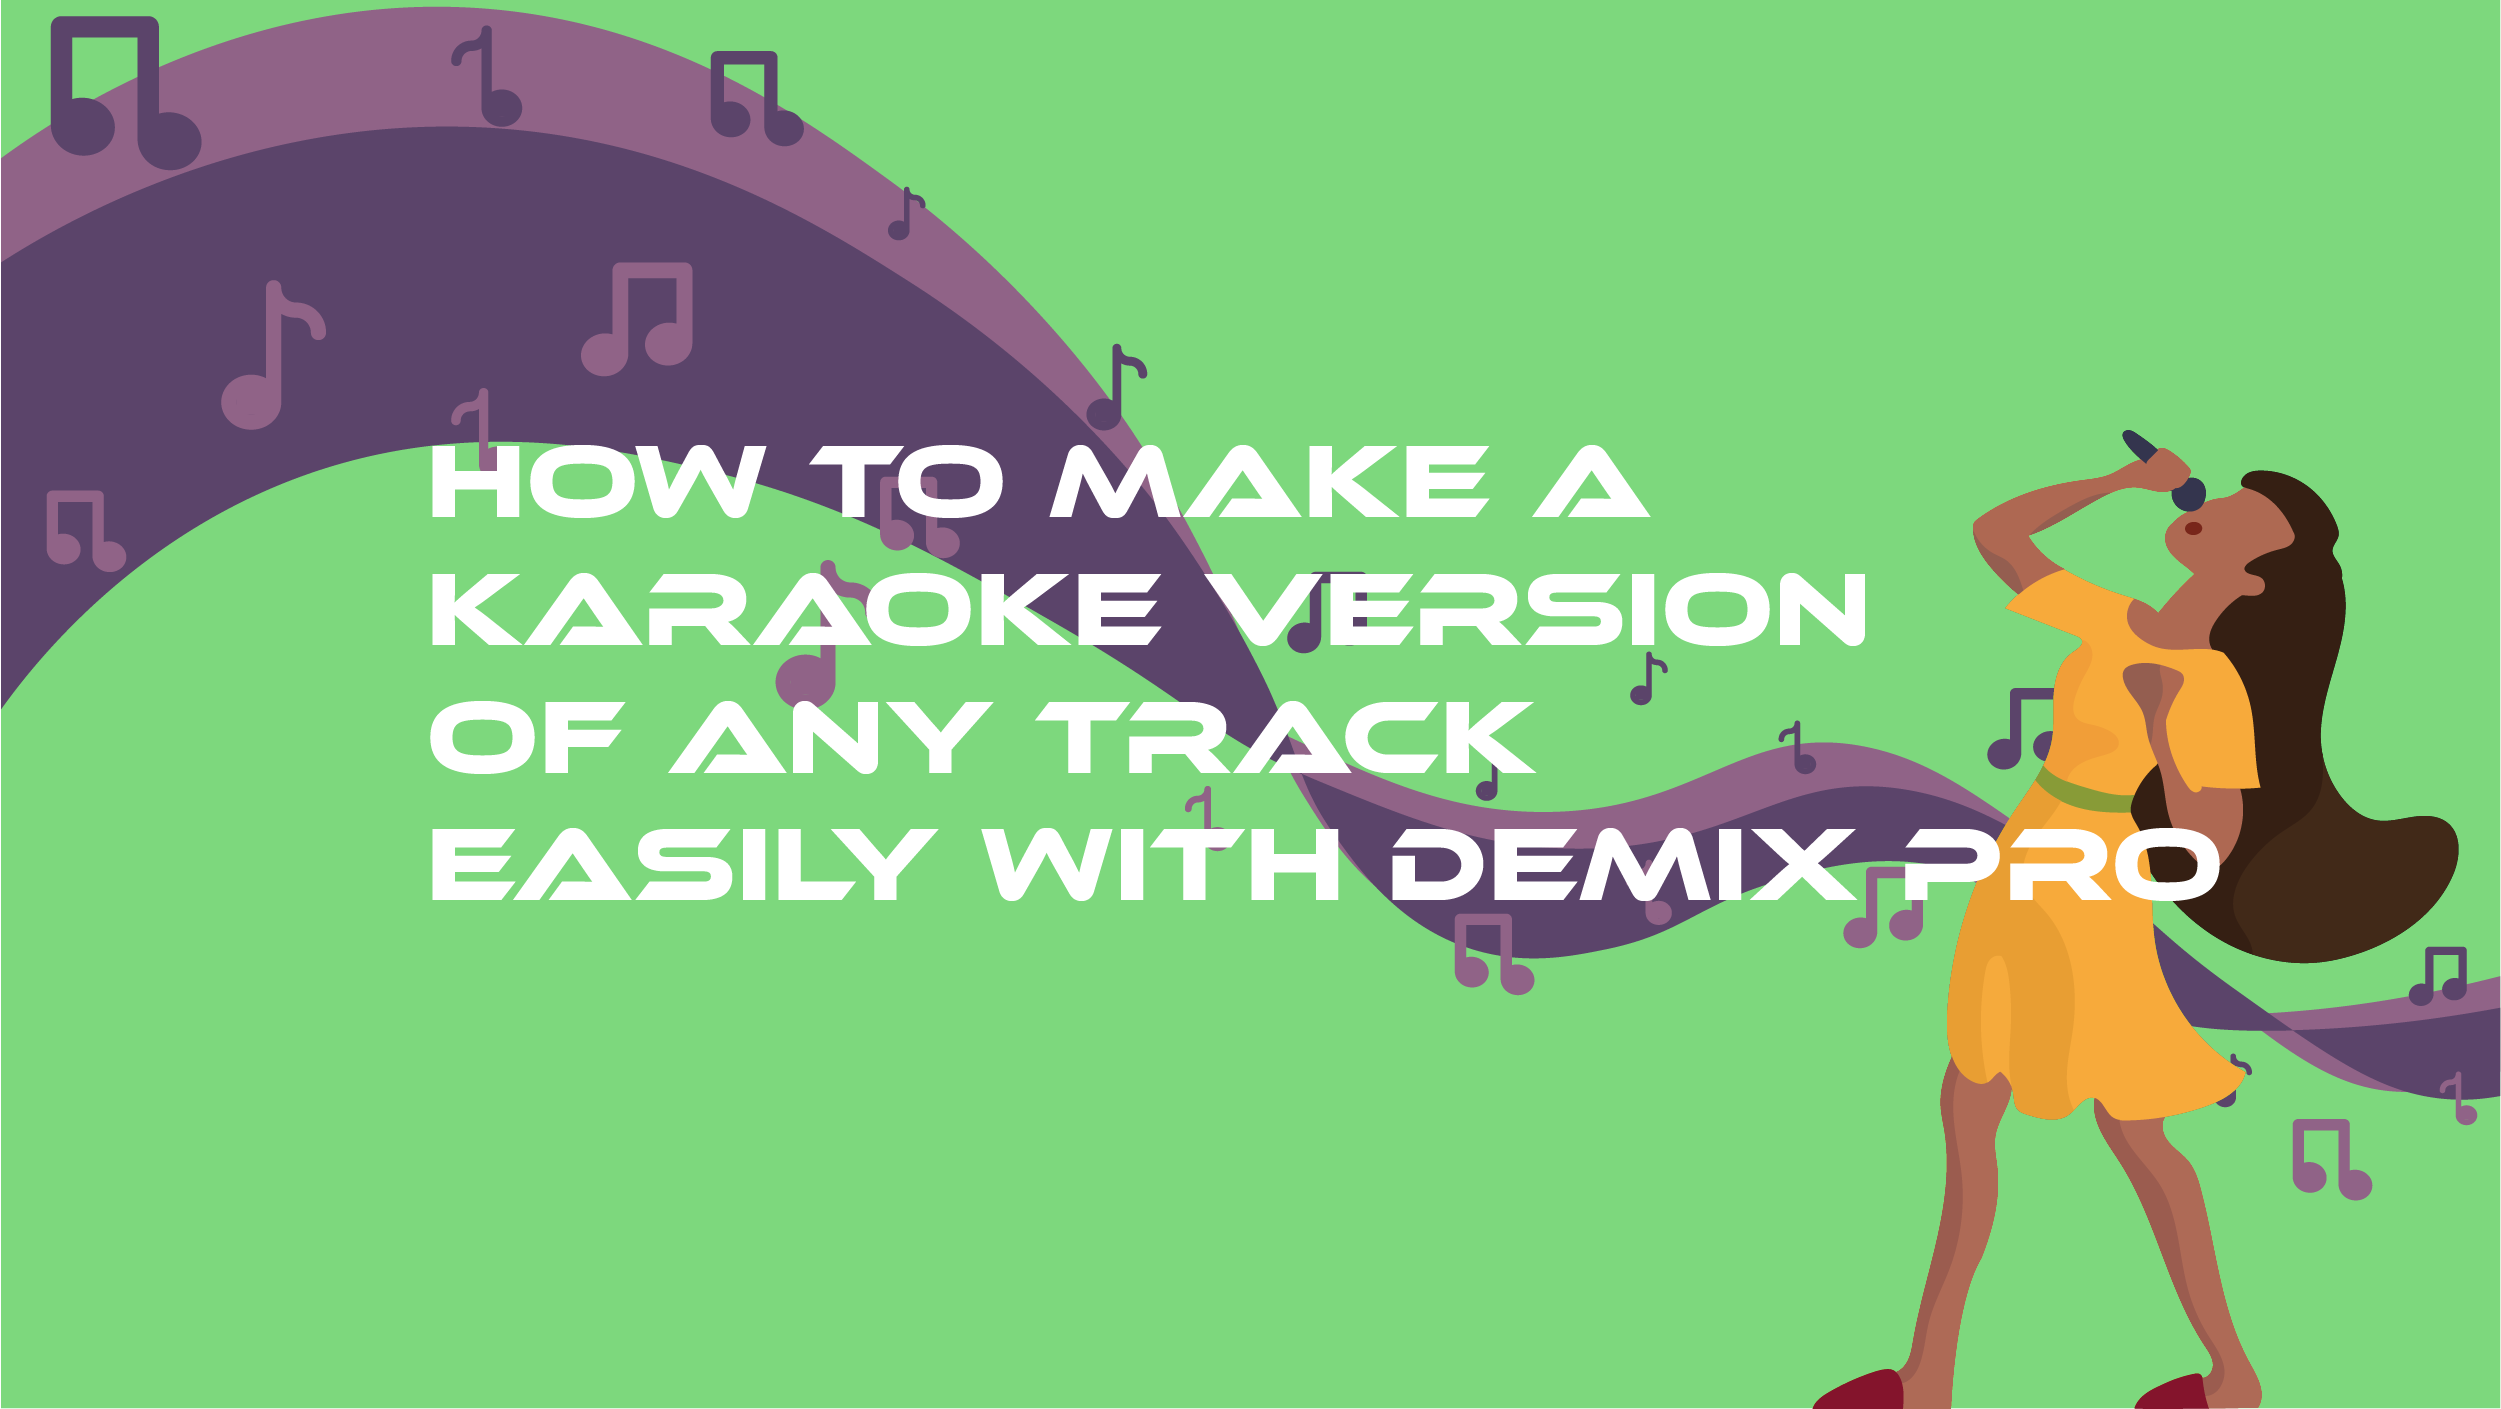 How to make a Karaoke Version of any Track quickly and easily with DeMix Pro